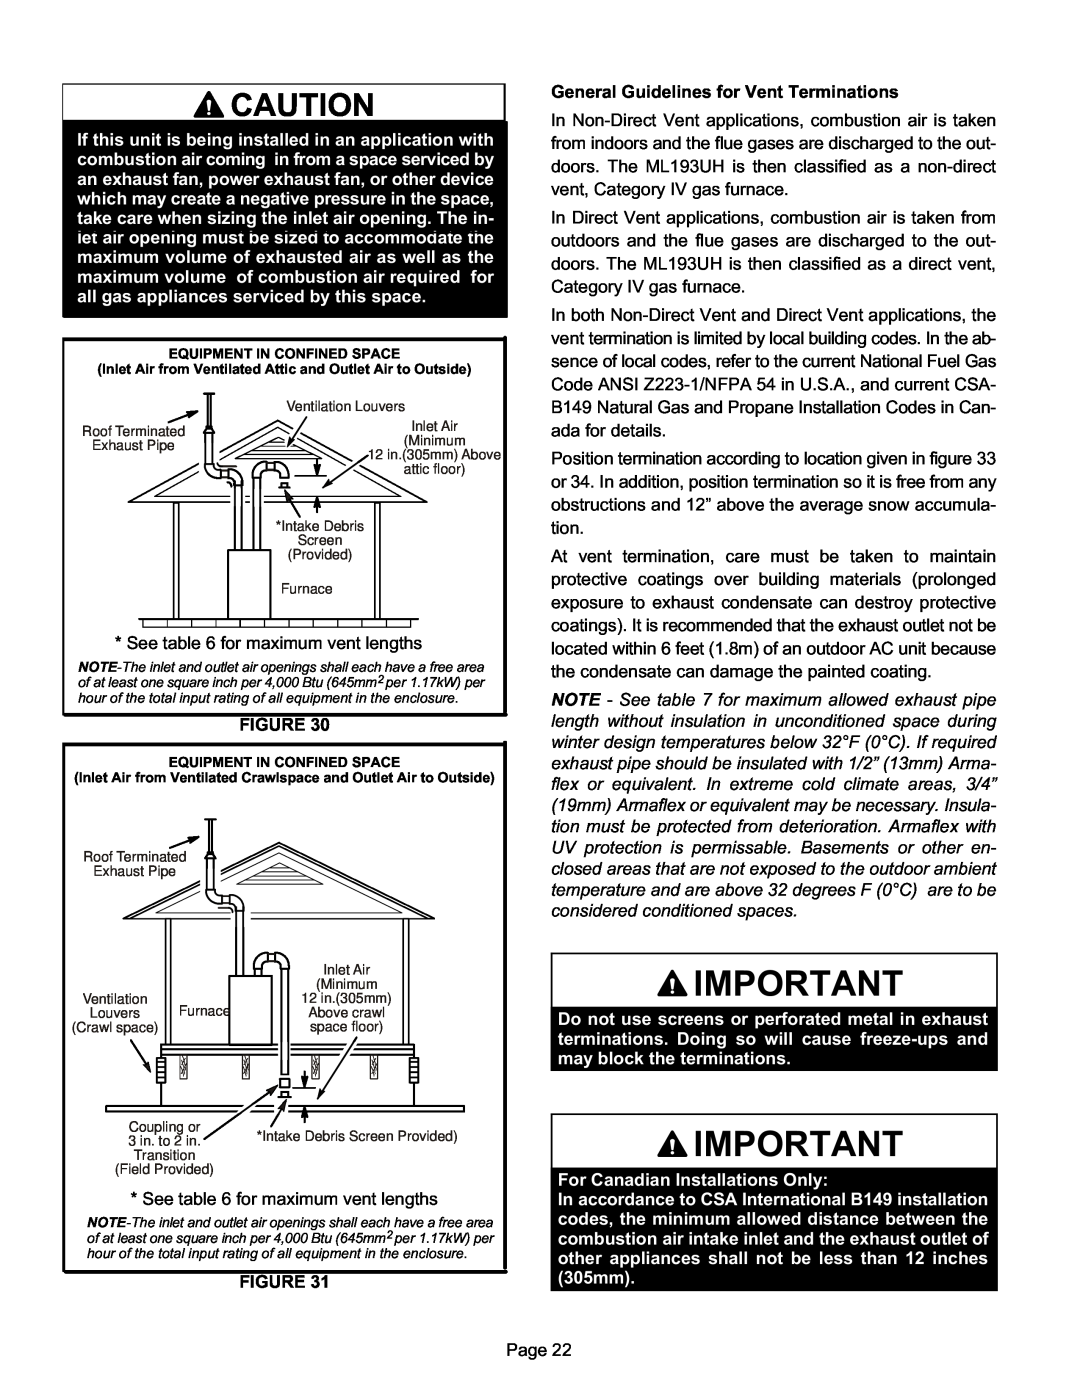 Lennox International Inc ML193UH General Guidelines for Vent Terminations, For Canadian Installations Only 